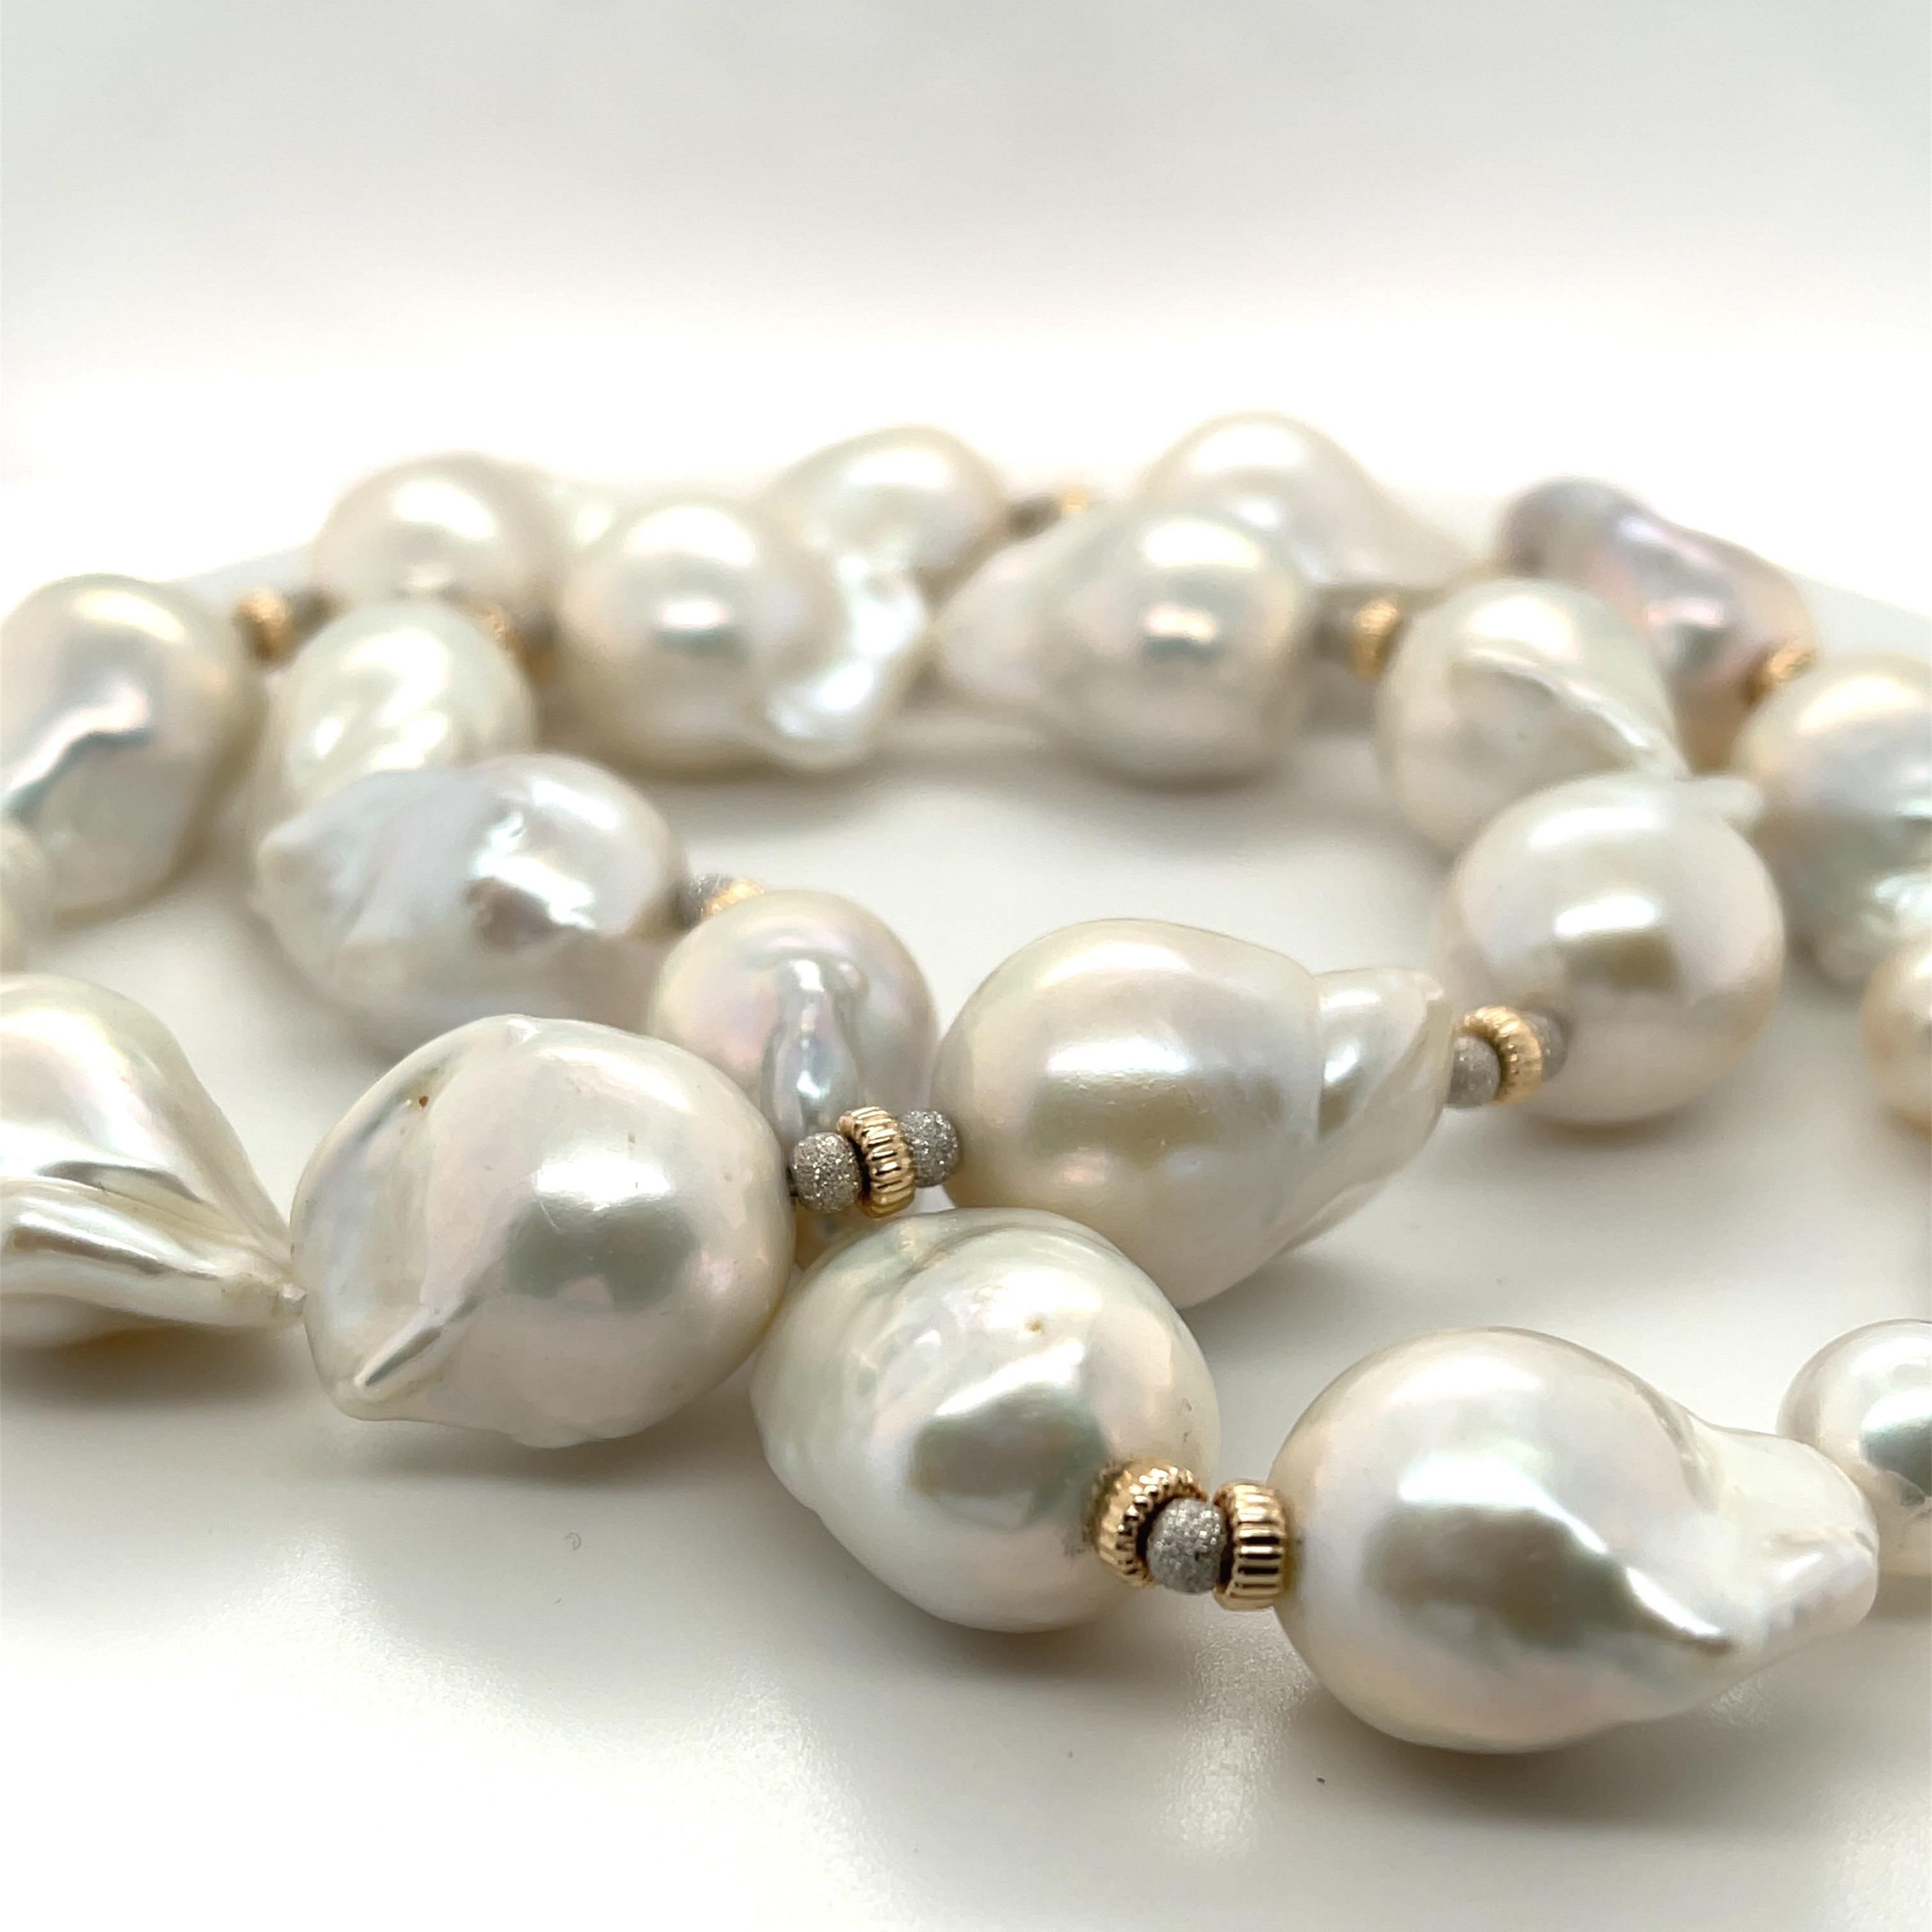 This impressive necklace features 19 large white baroque freshwater nucleated pearls ranging in size from 14 to 16mm! They have beautiful white and silvery-white pearlescence and have been hand strung on silk thread with 14k white and yellow gold